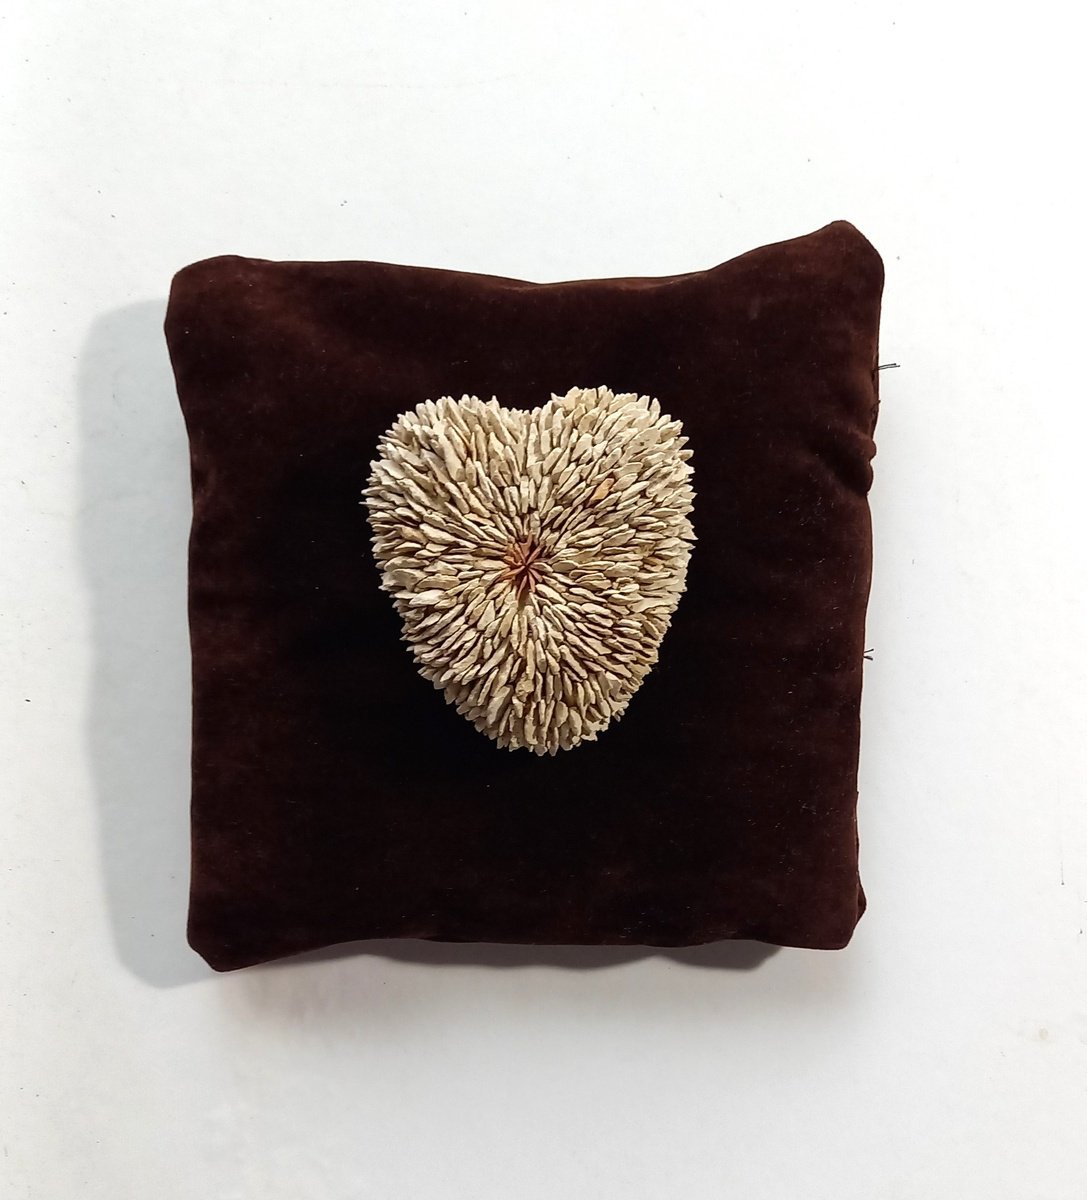 Small heart on a brown pillow by Emanuela Camacci